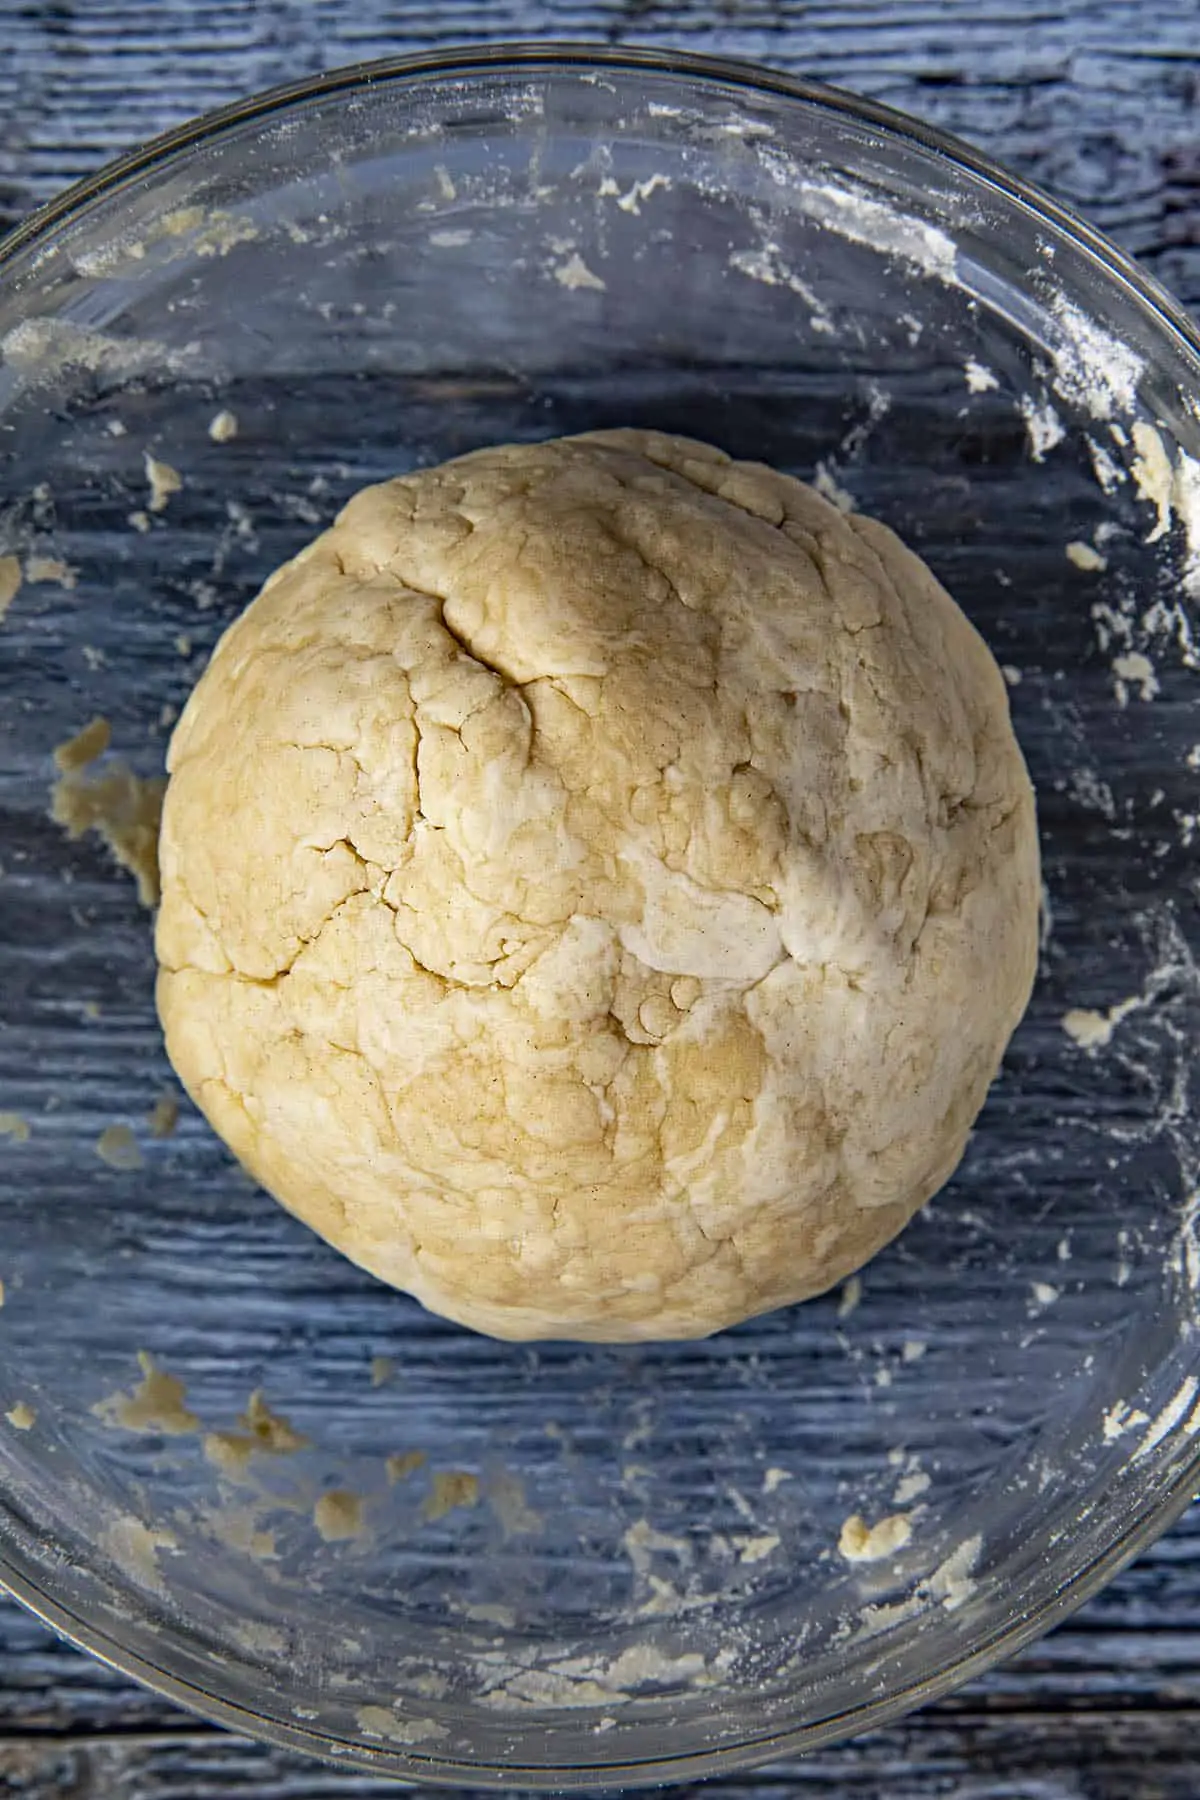 Forming the flatbread dough ball